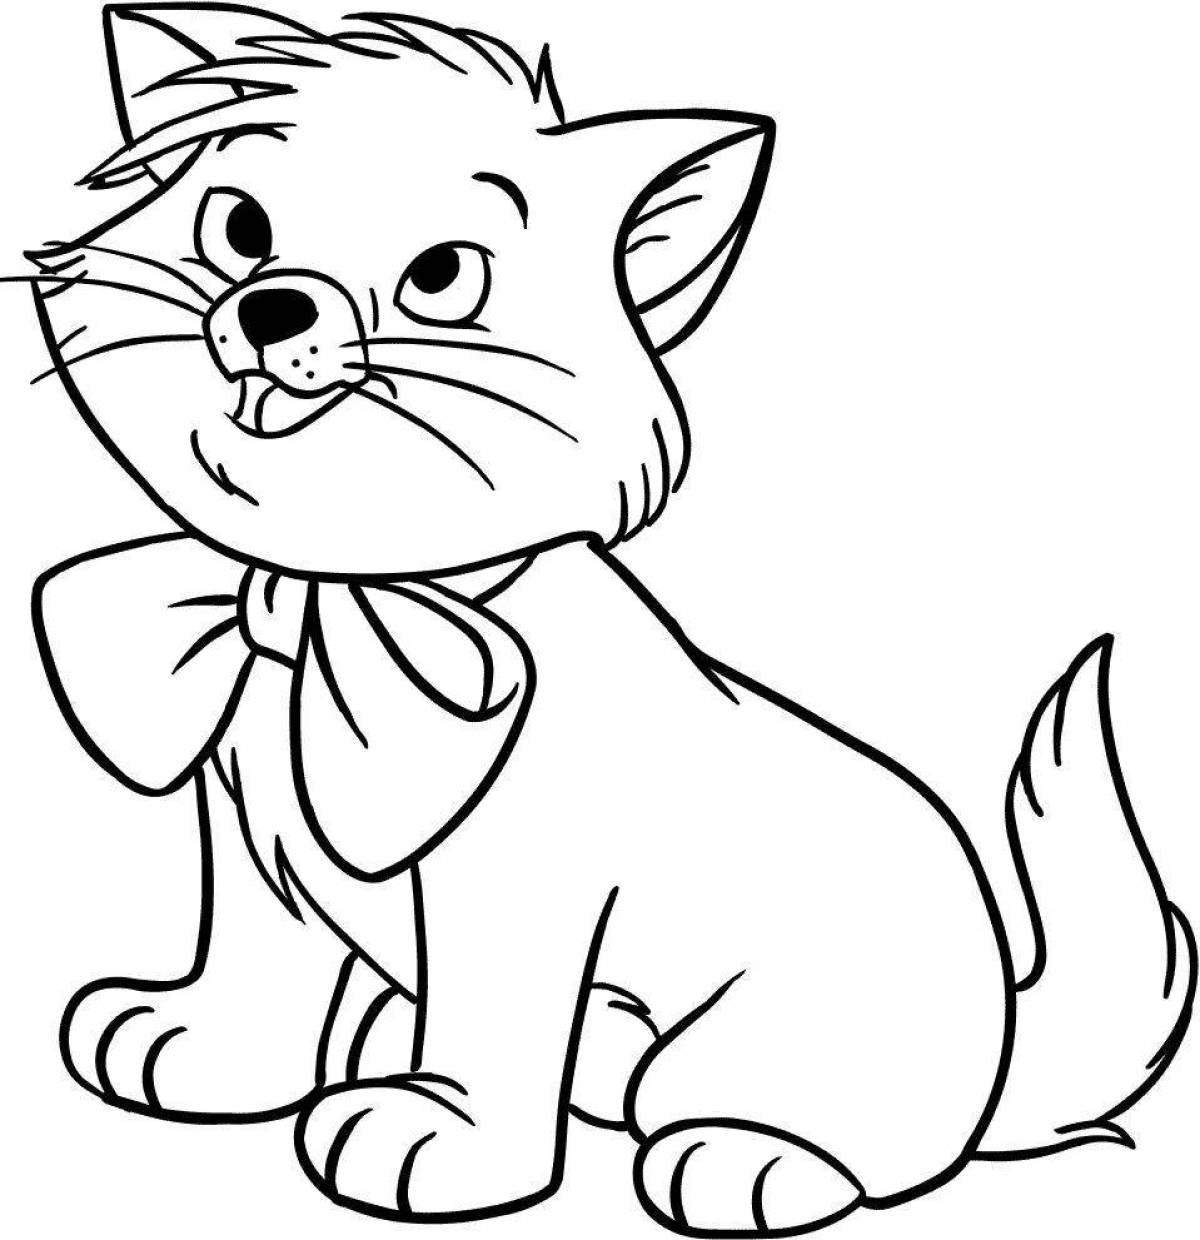 Coloring page funny cat with a bow